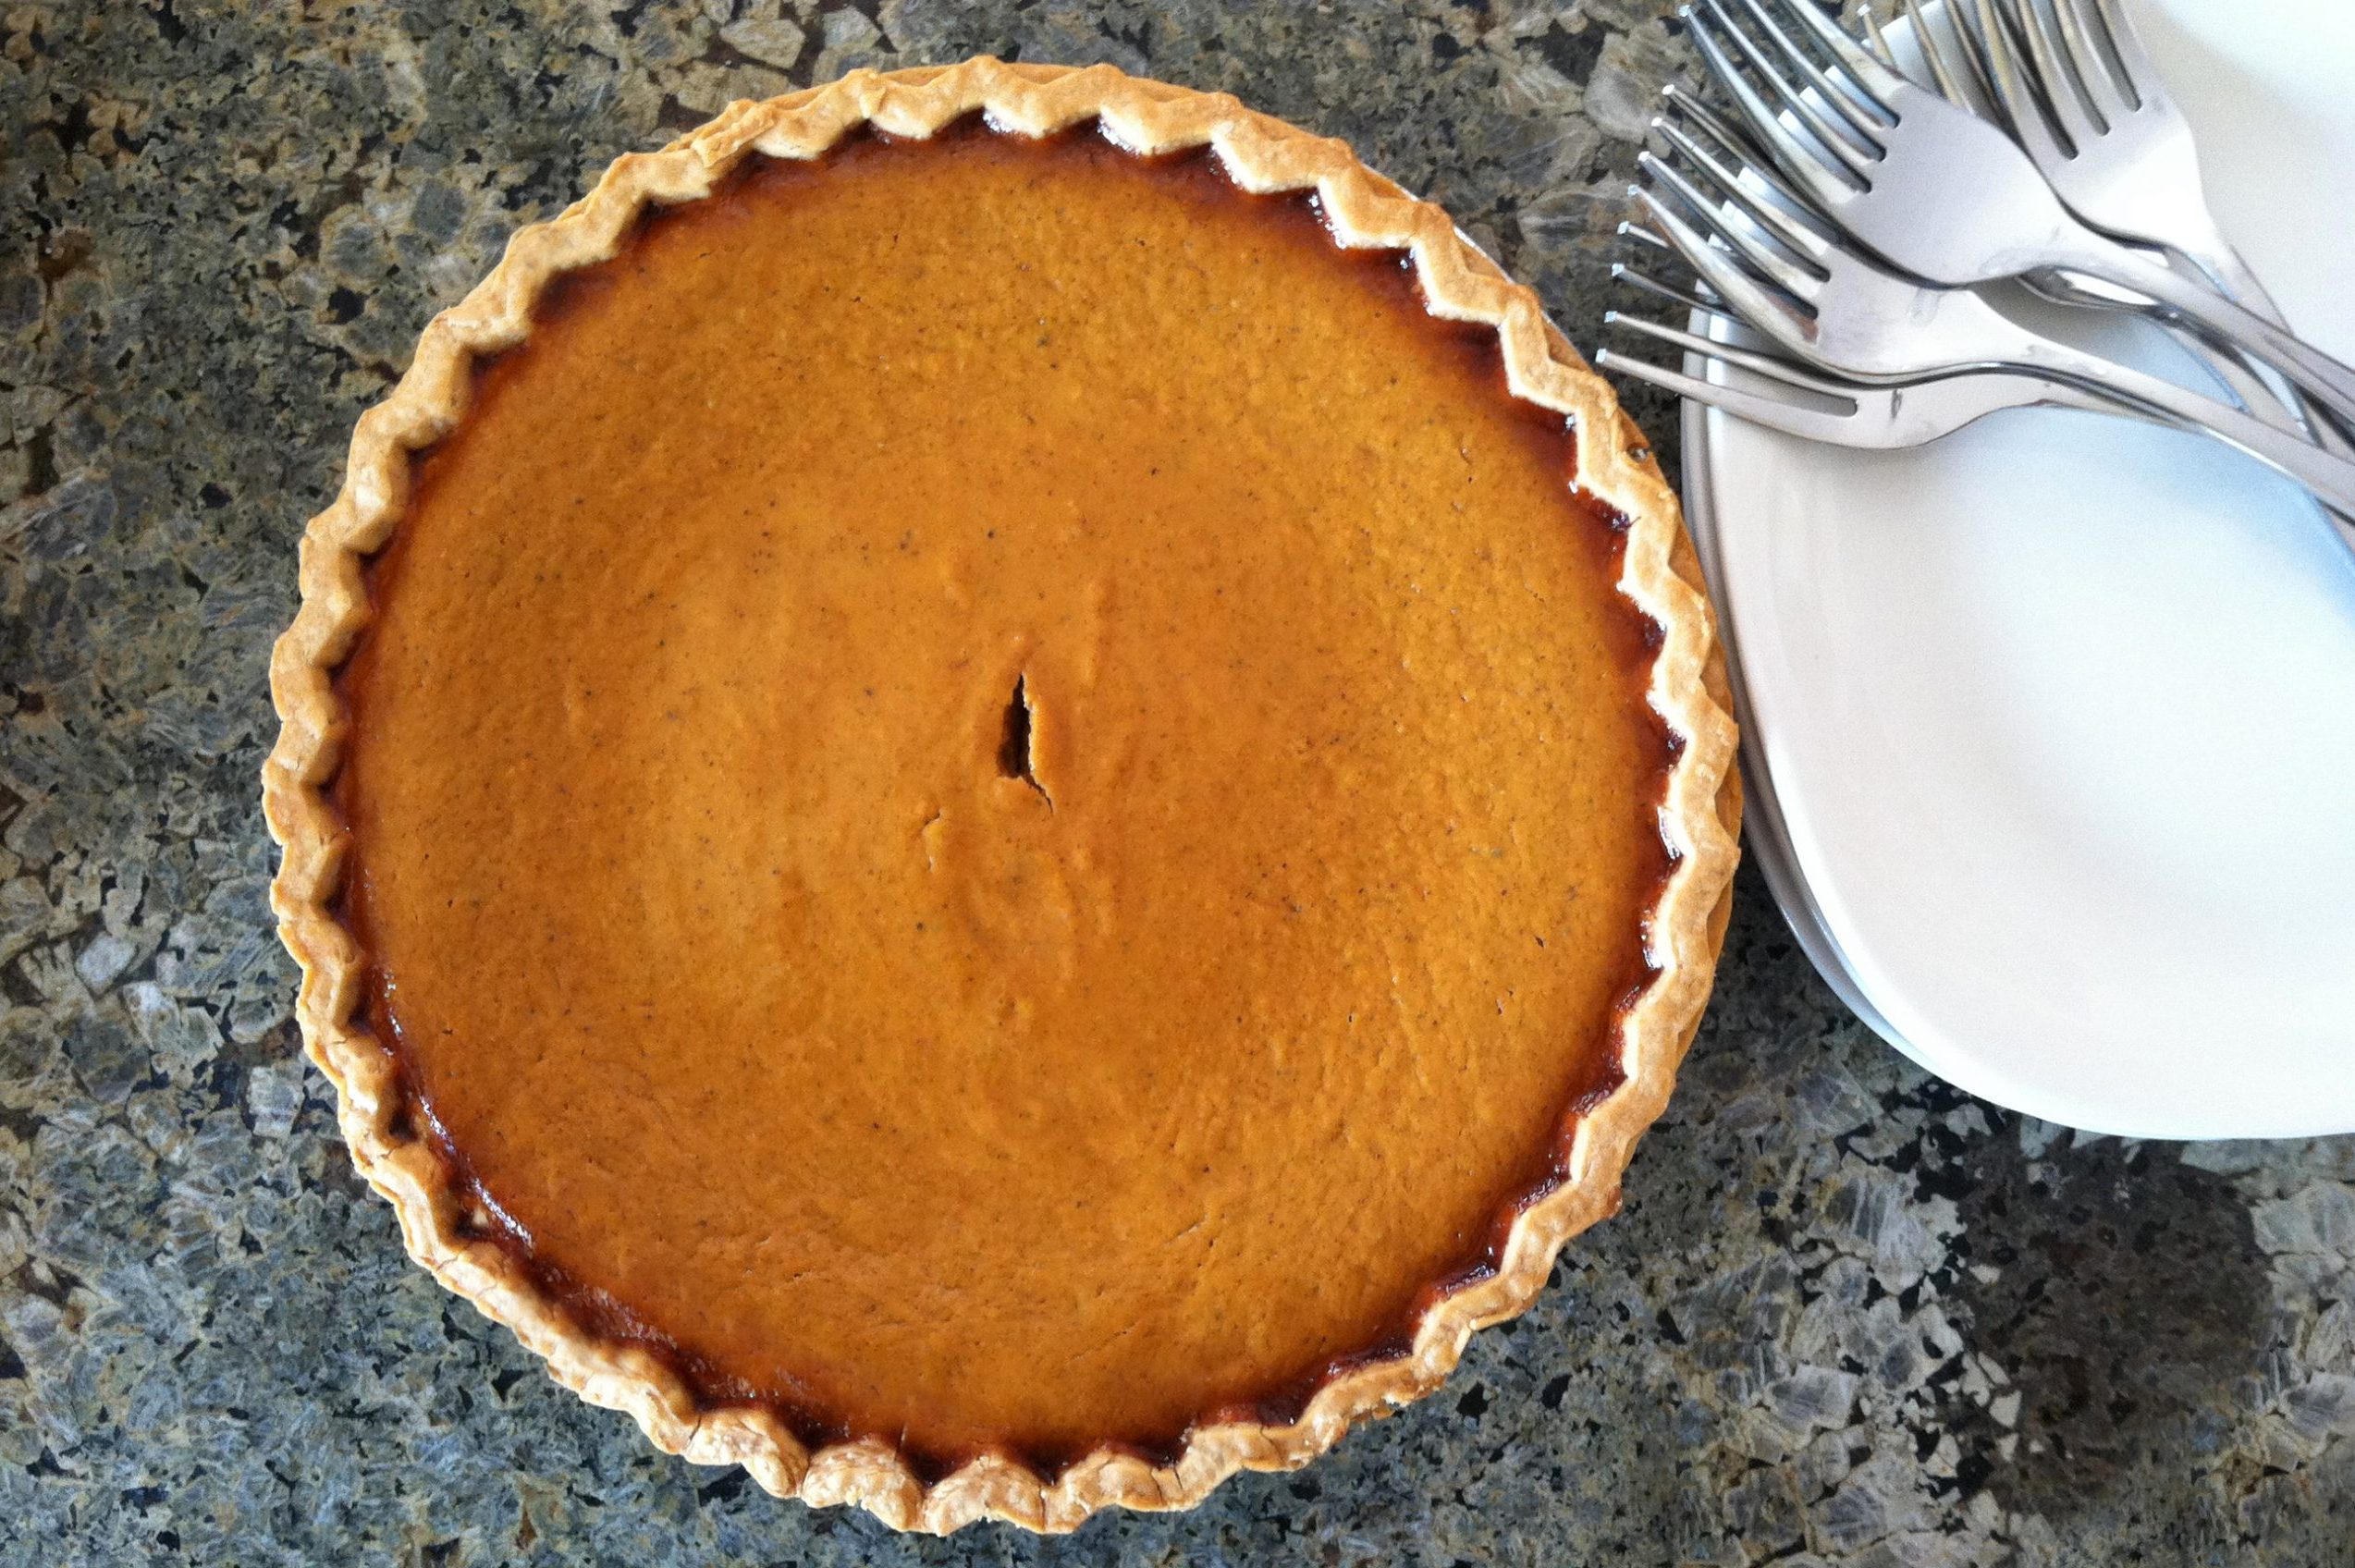 Costco Pumpkin Pie — Does It Need to Be Refrigerated?